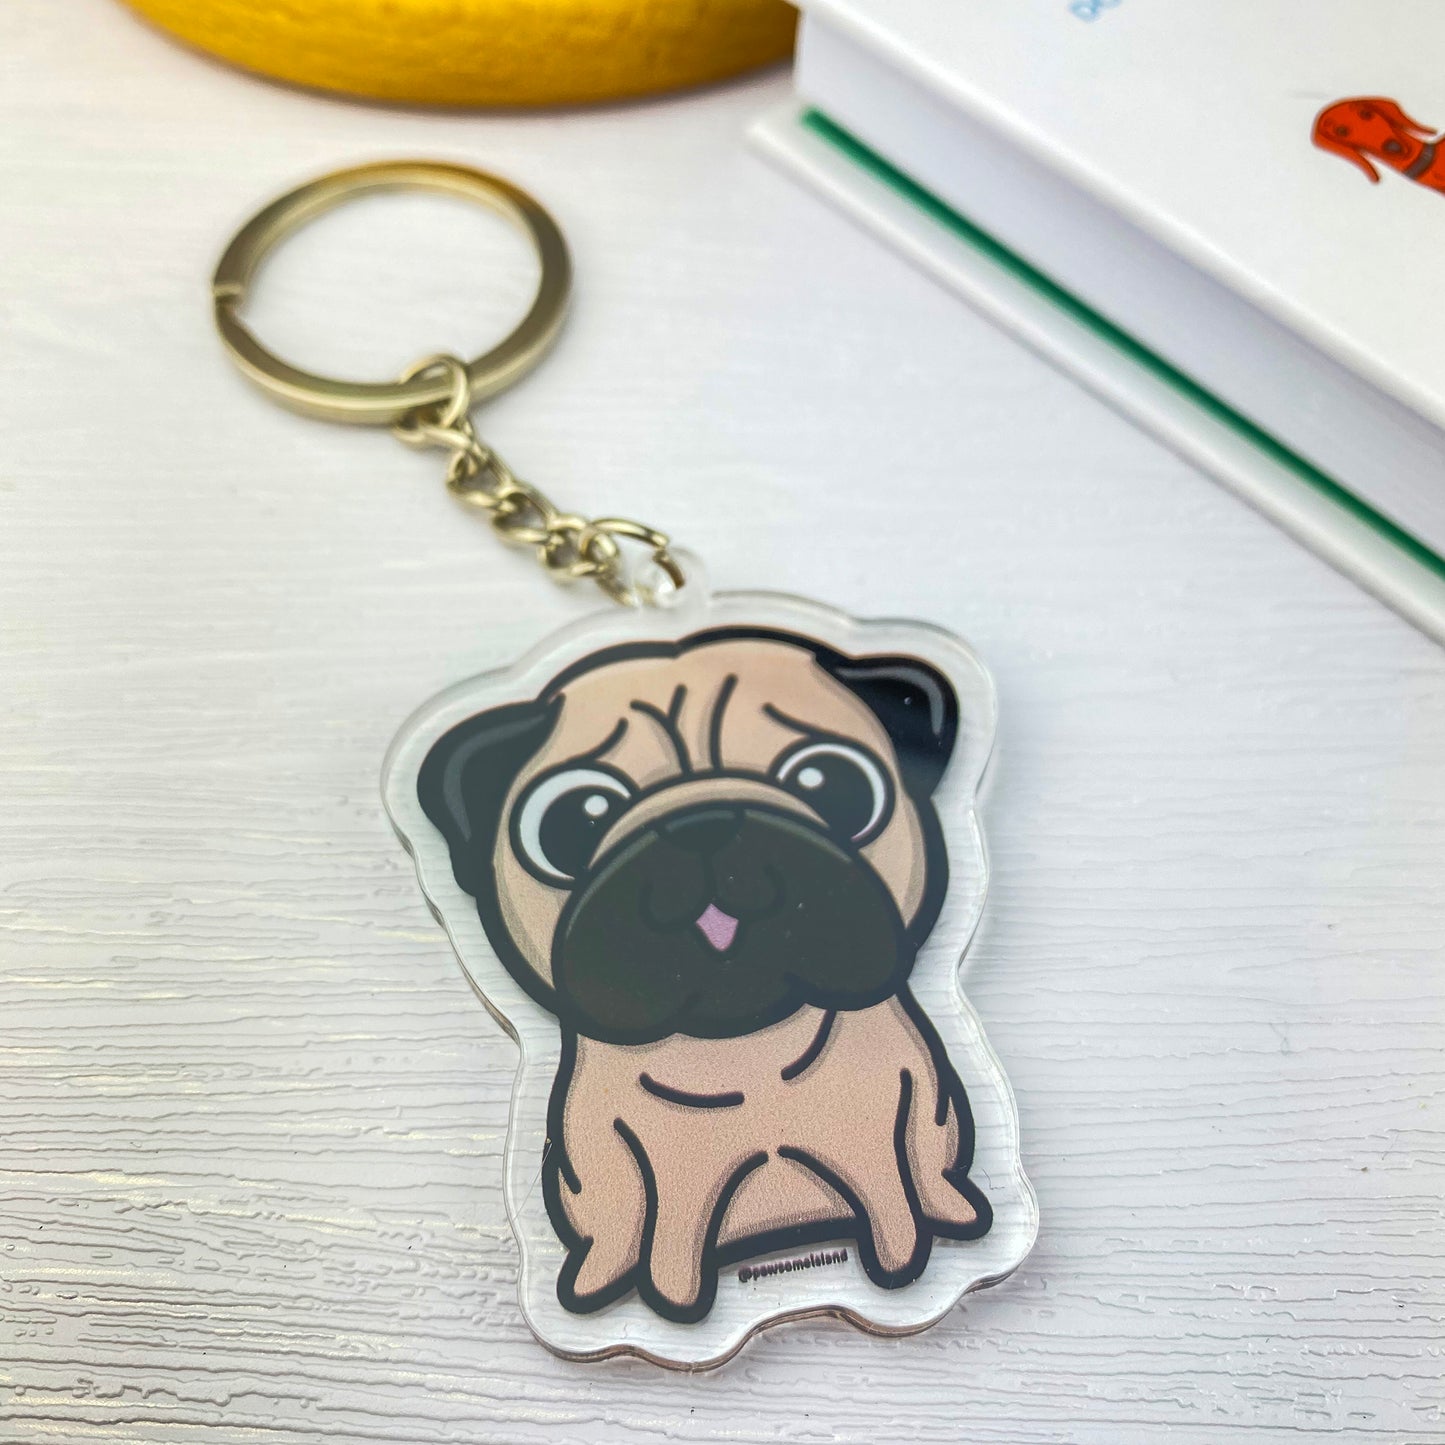 Starling Mike double-sided keychain is seated and fastened to